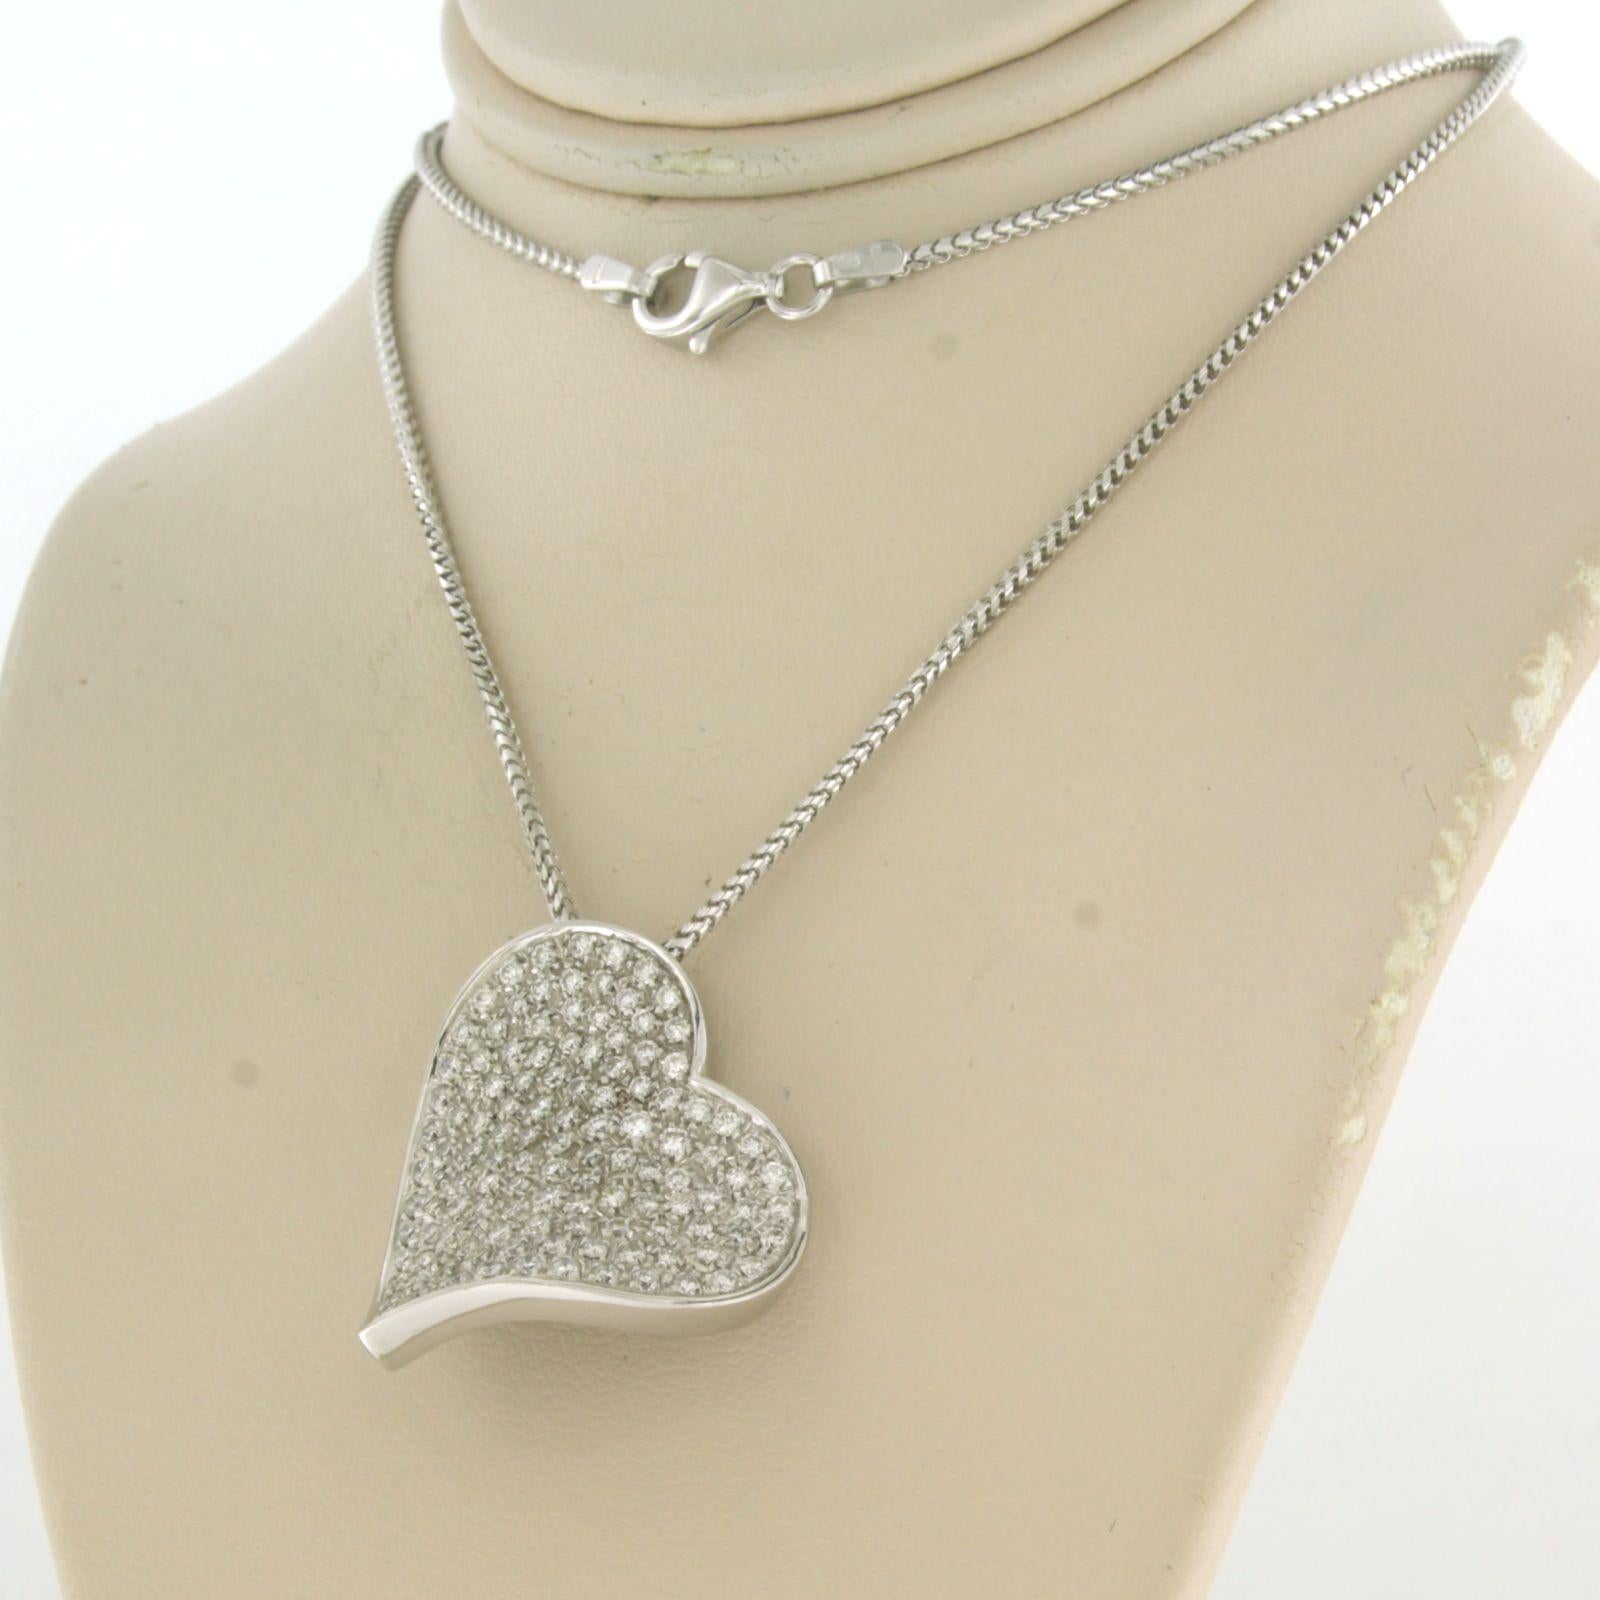 Chain and pendant in shape of a heart set with diamonds 18k white gold In Good Condition For Sale In The Hague, ZH